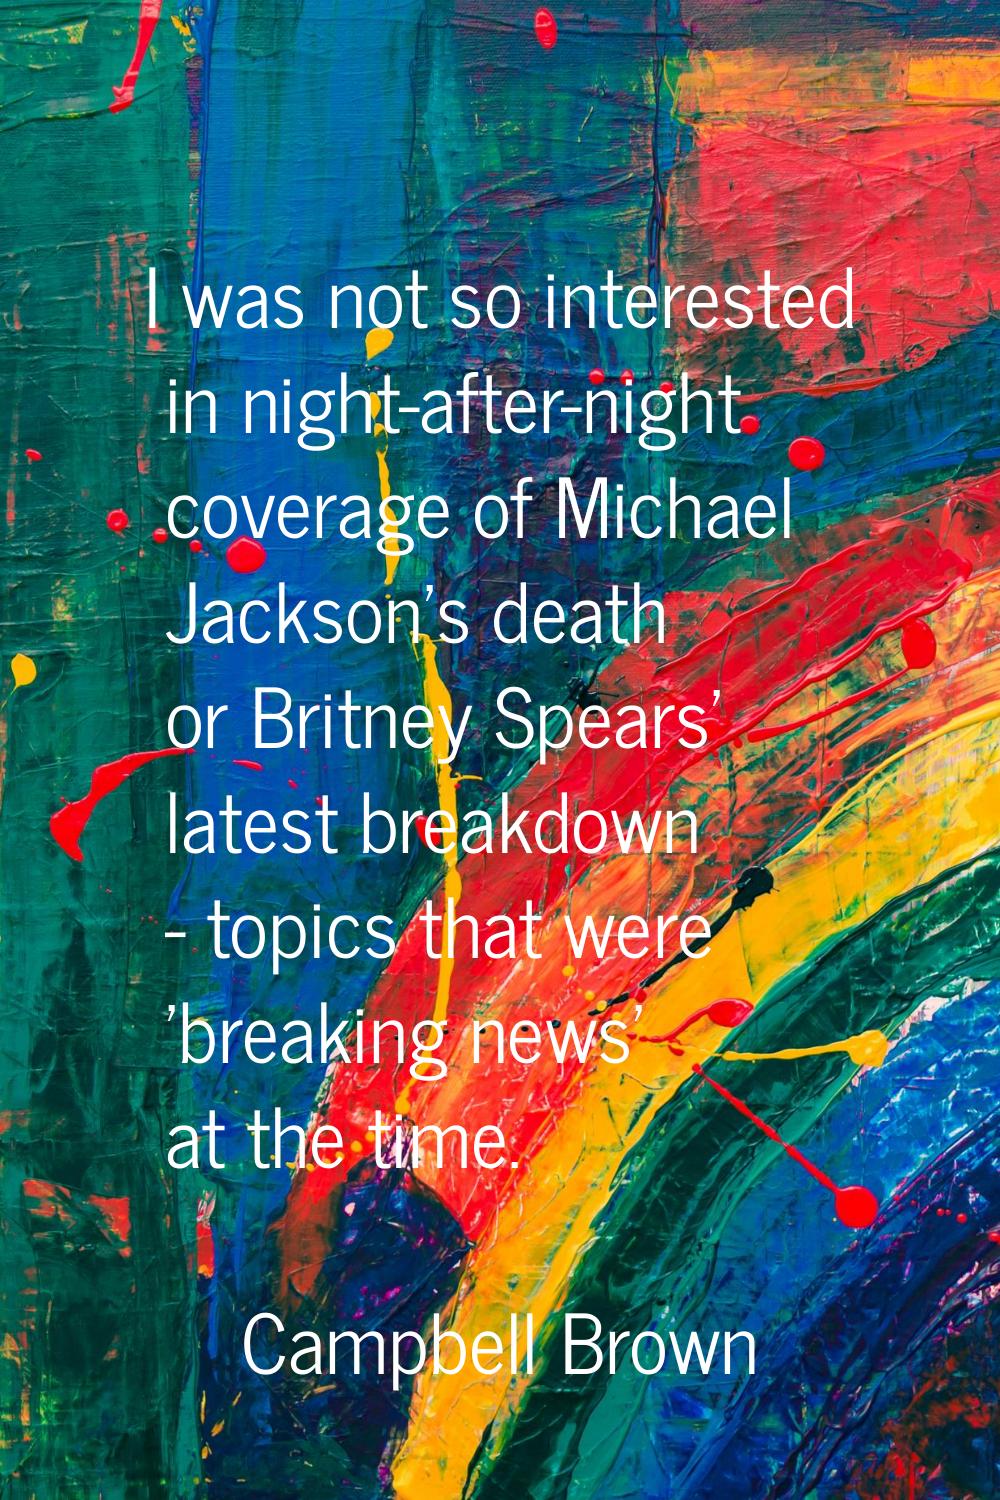 I was not so interested in night-after-night coverage of Michael Jackson's death or Britney Spears'